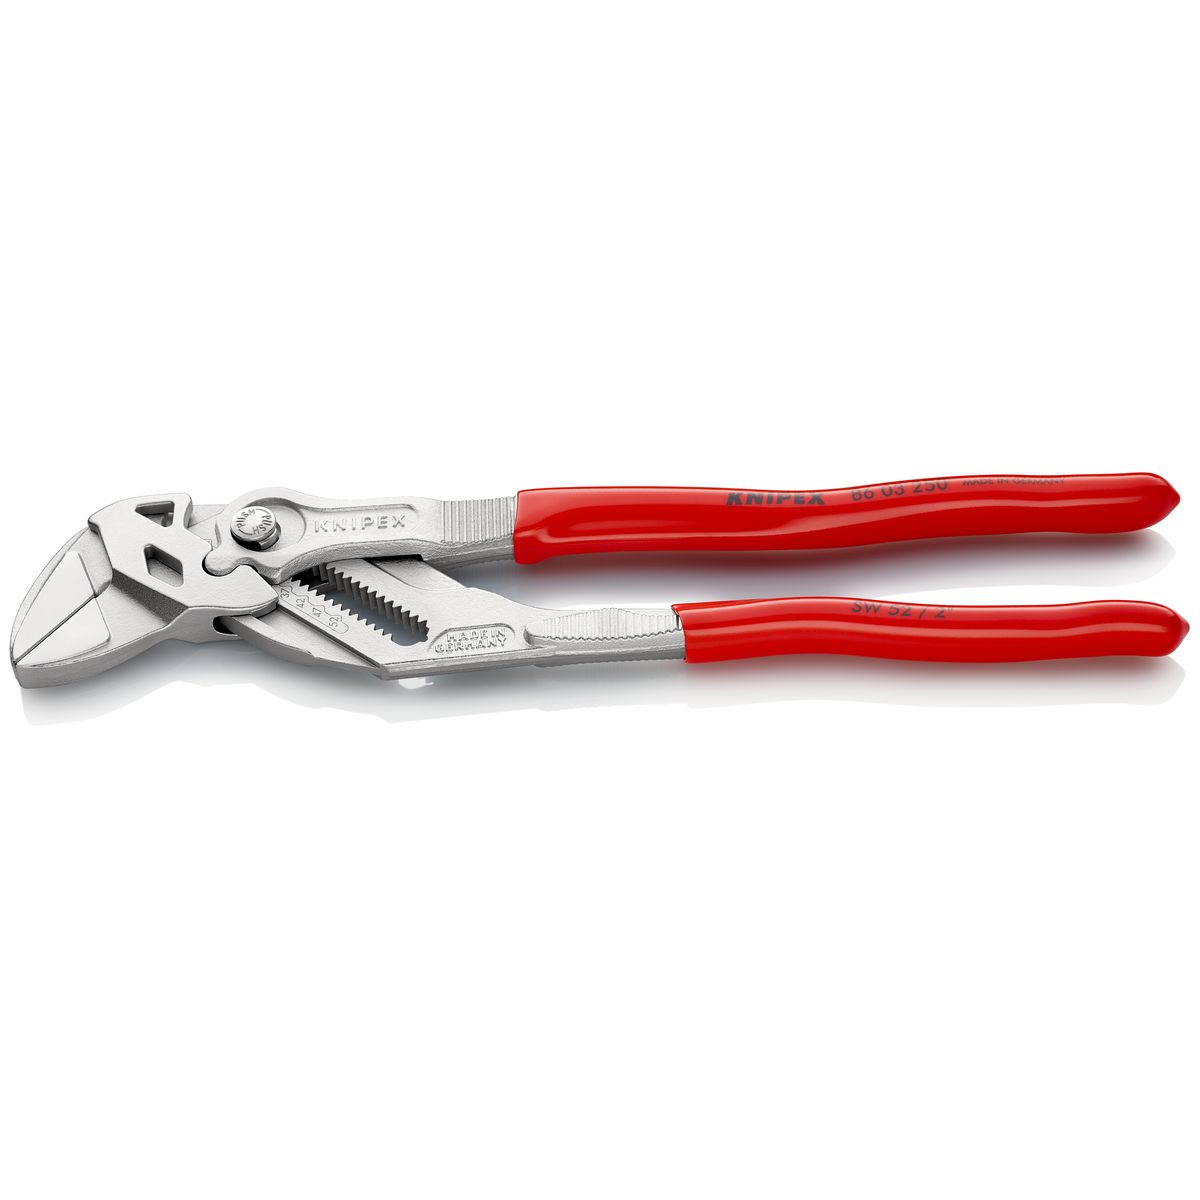 PLIER WRENCHES 8603250 Knipex